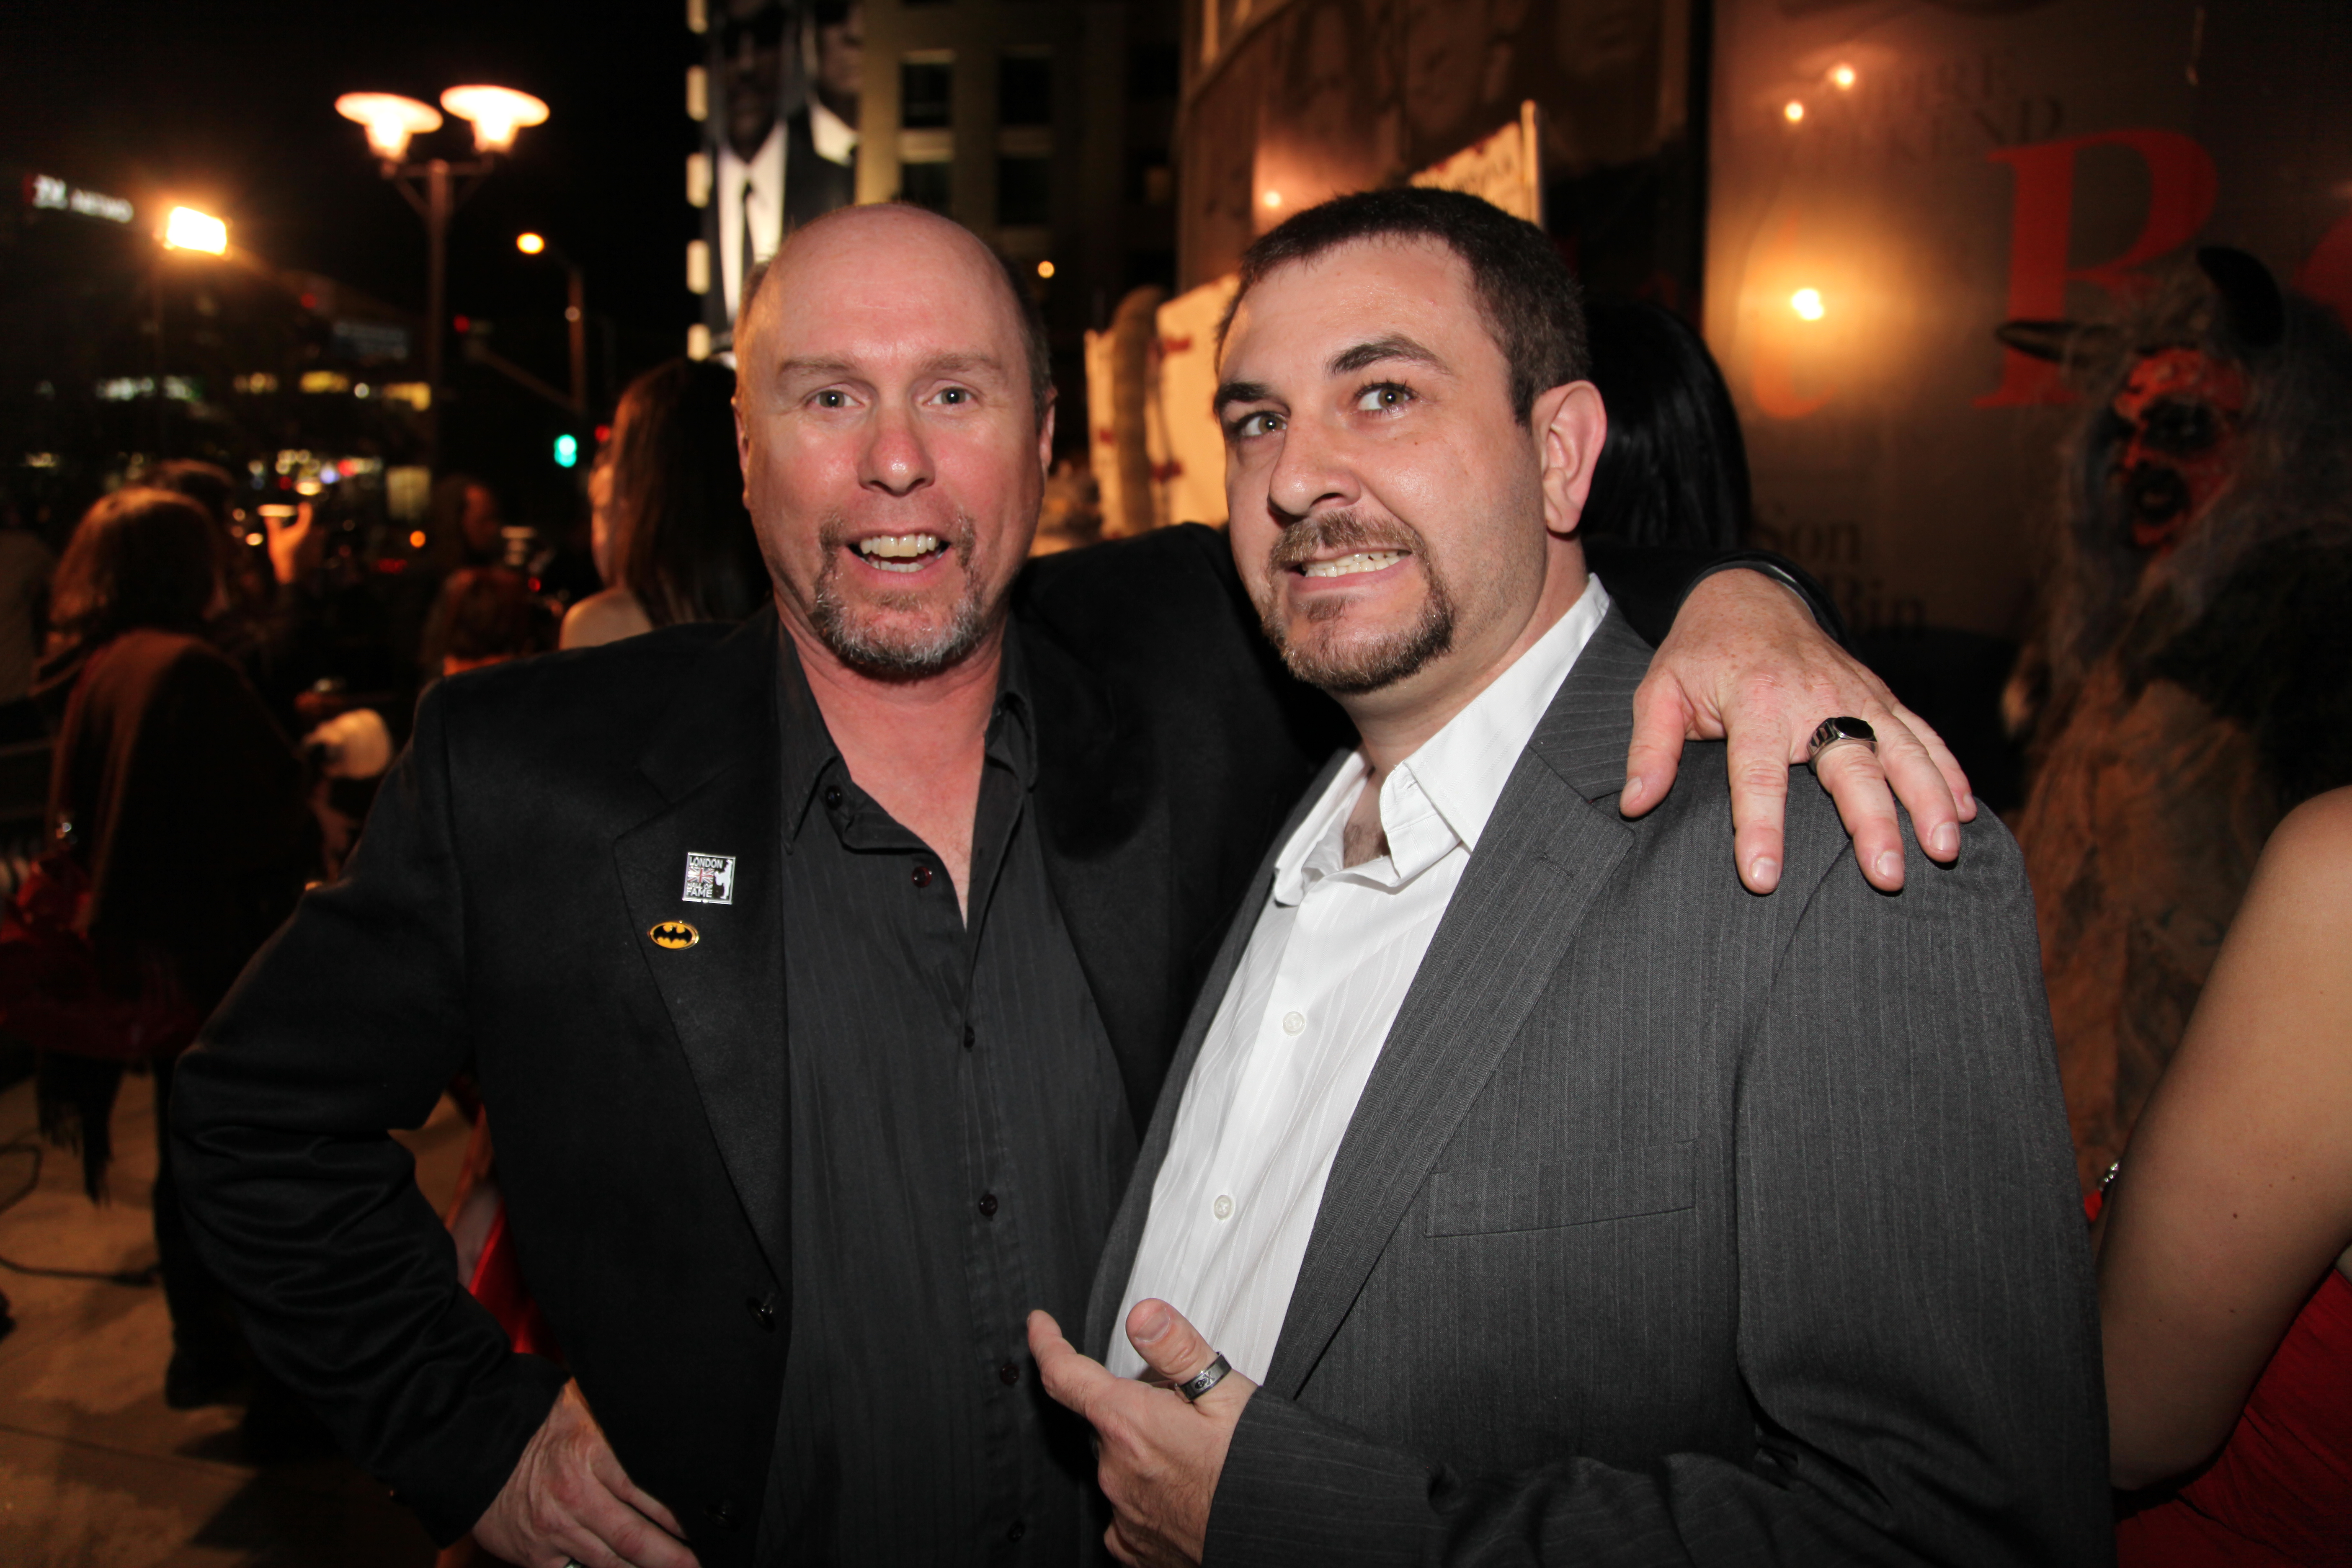 David Fultz and Mike Holman at the Monster Man Season One wrap party in Hollywood